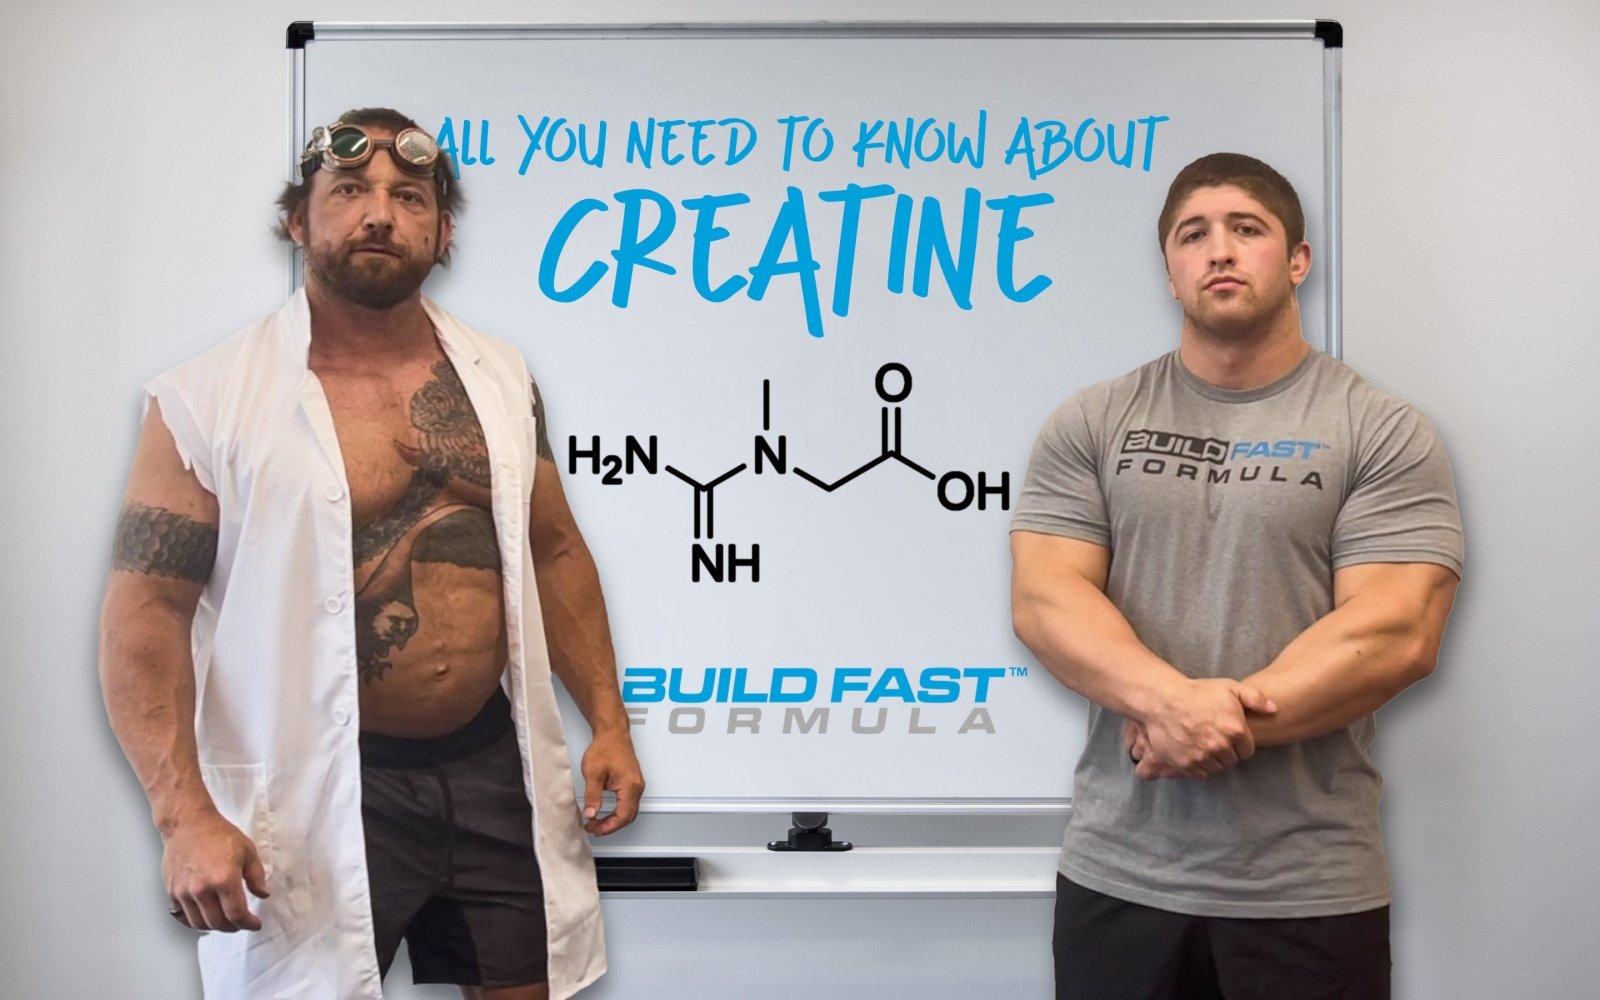 All You Need to Know About Creatine - BuildFastFormula